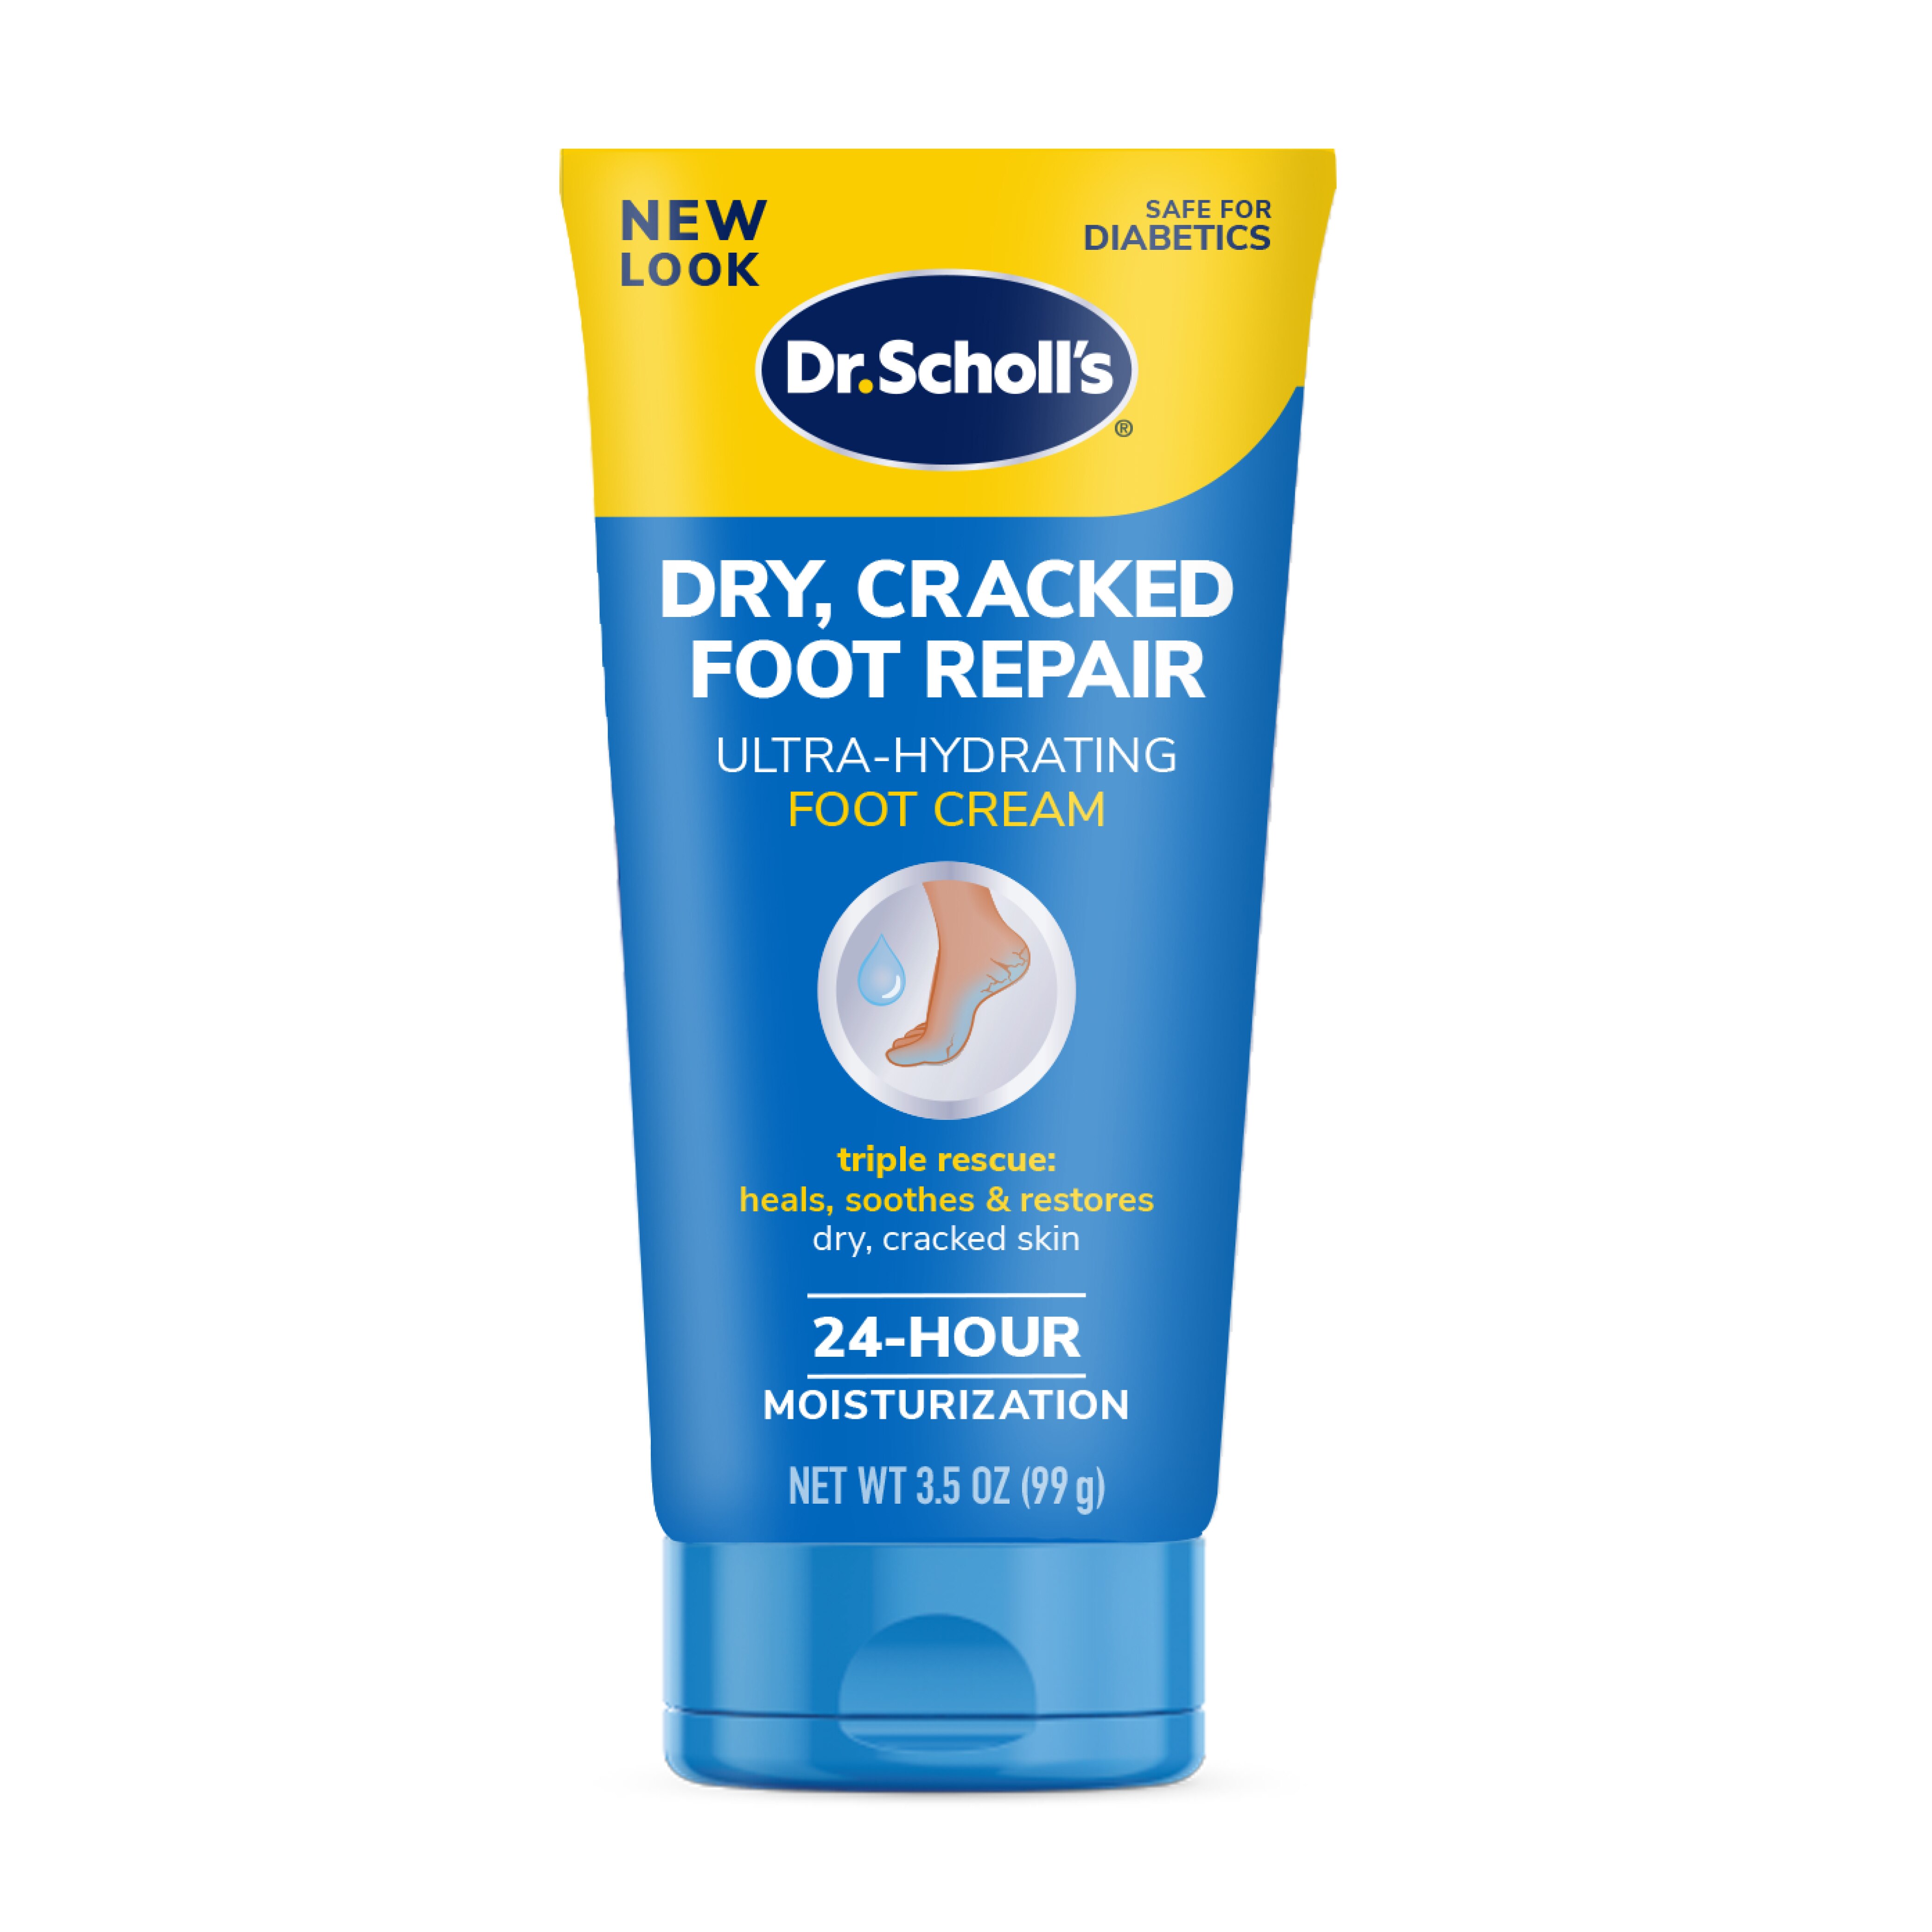 Dr. Scholl's Dry, Cracked Foot Repair Ultra-Hydrating Foot Cream 3.5 oz